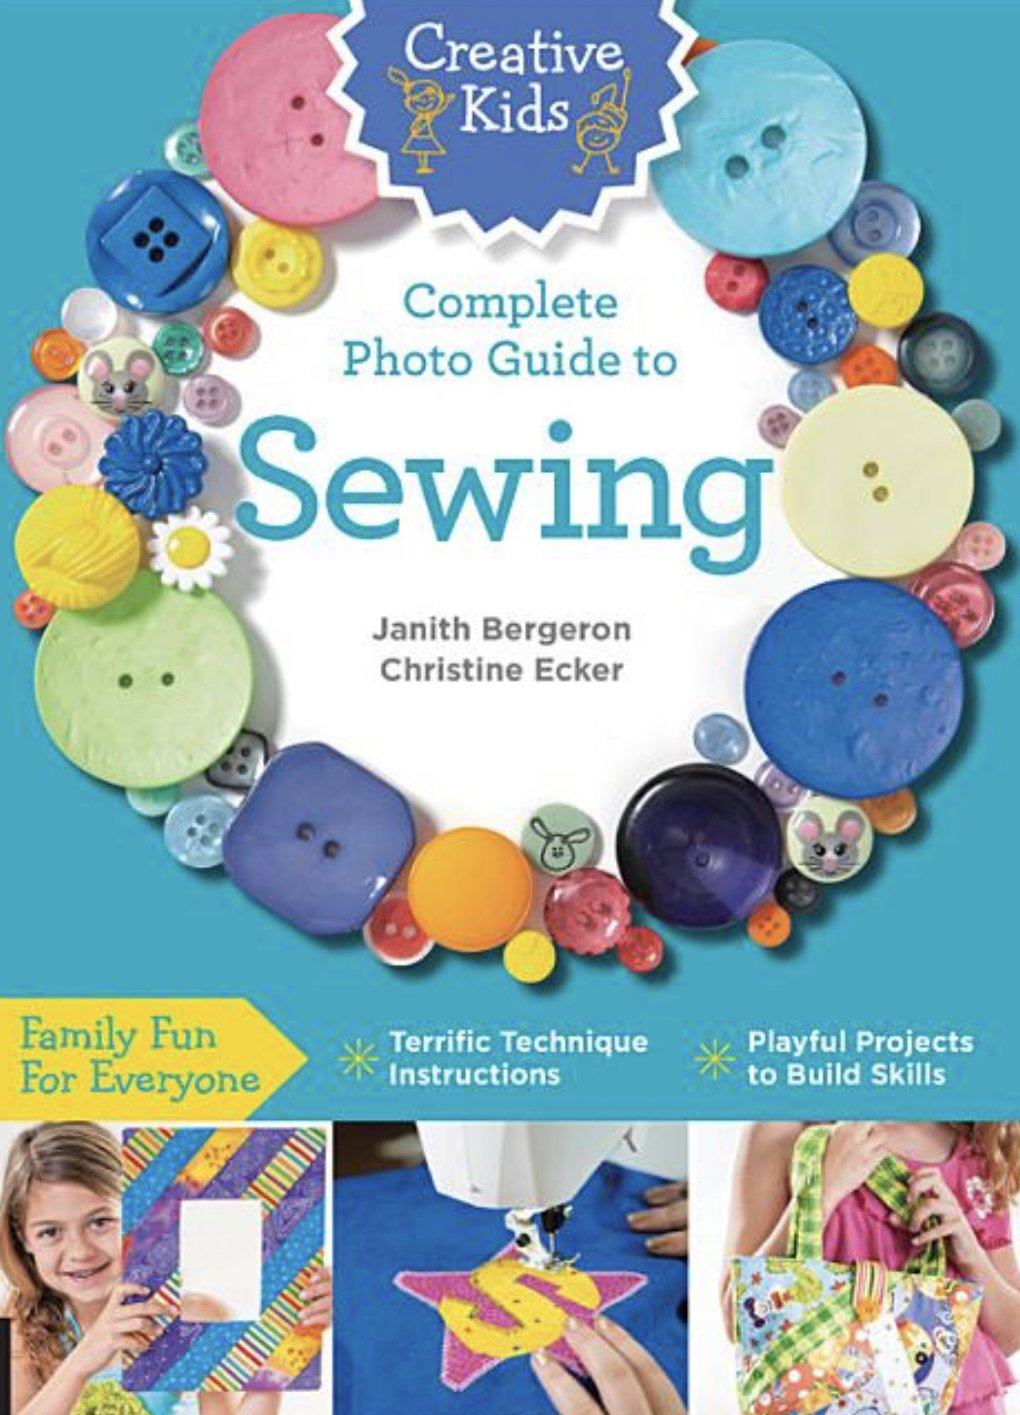 Creative Kids | Photo Guide to Sewing | Kids Sewing - Alder & Alouette